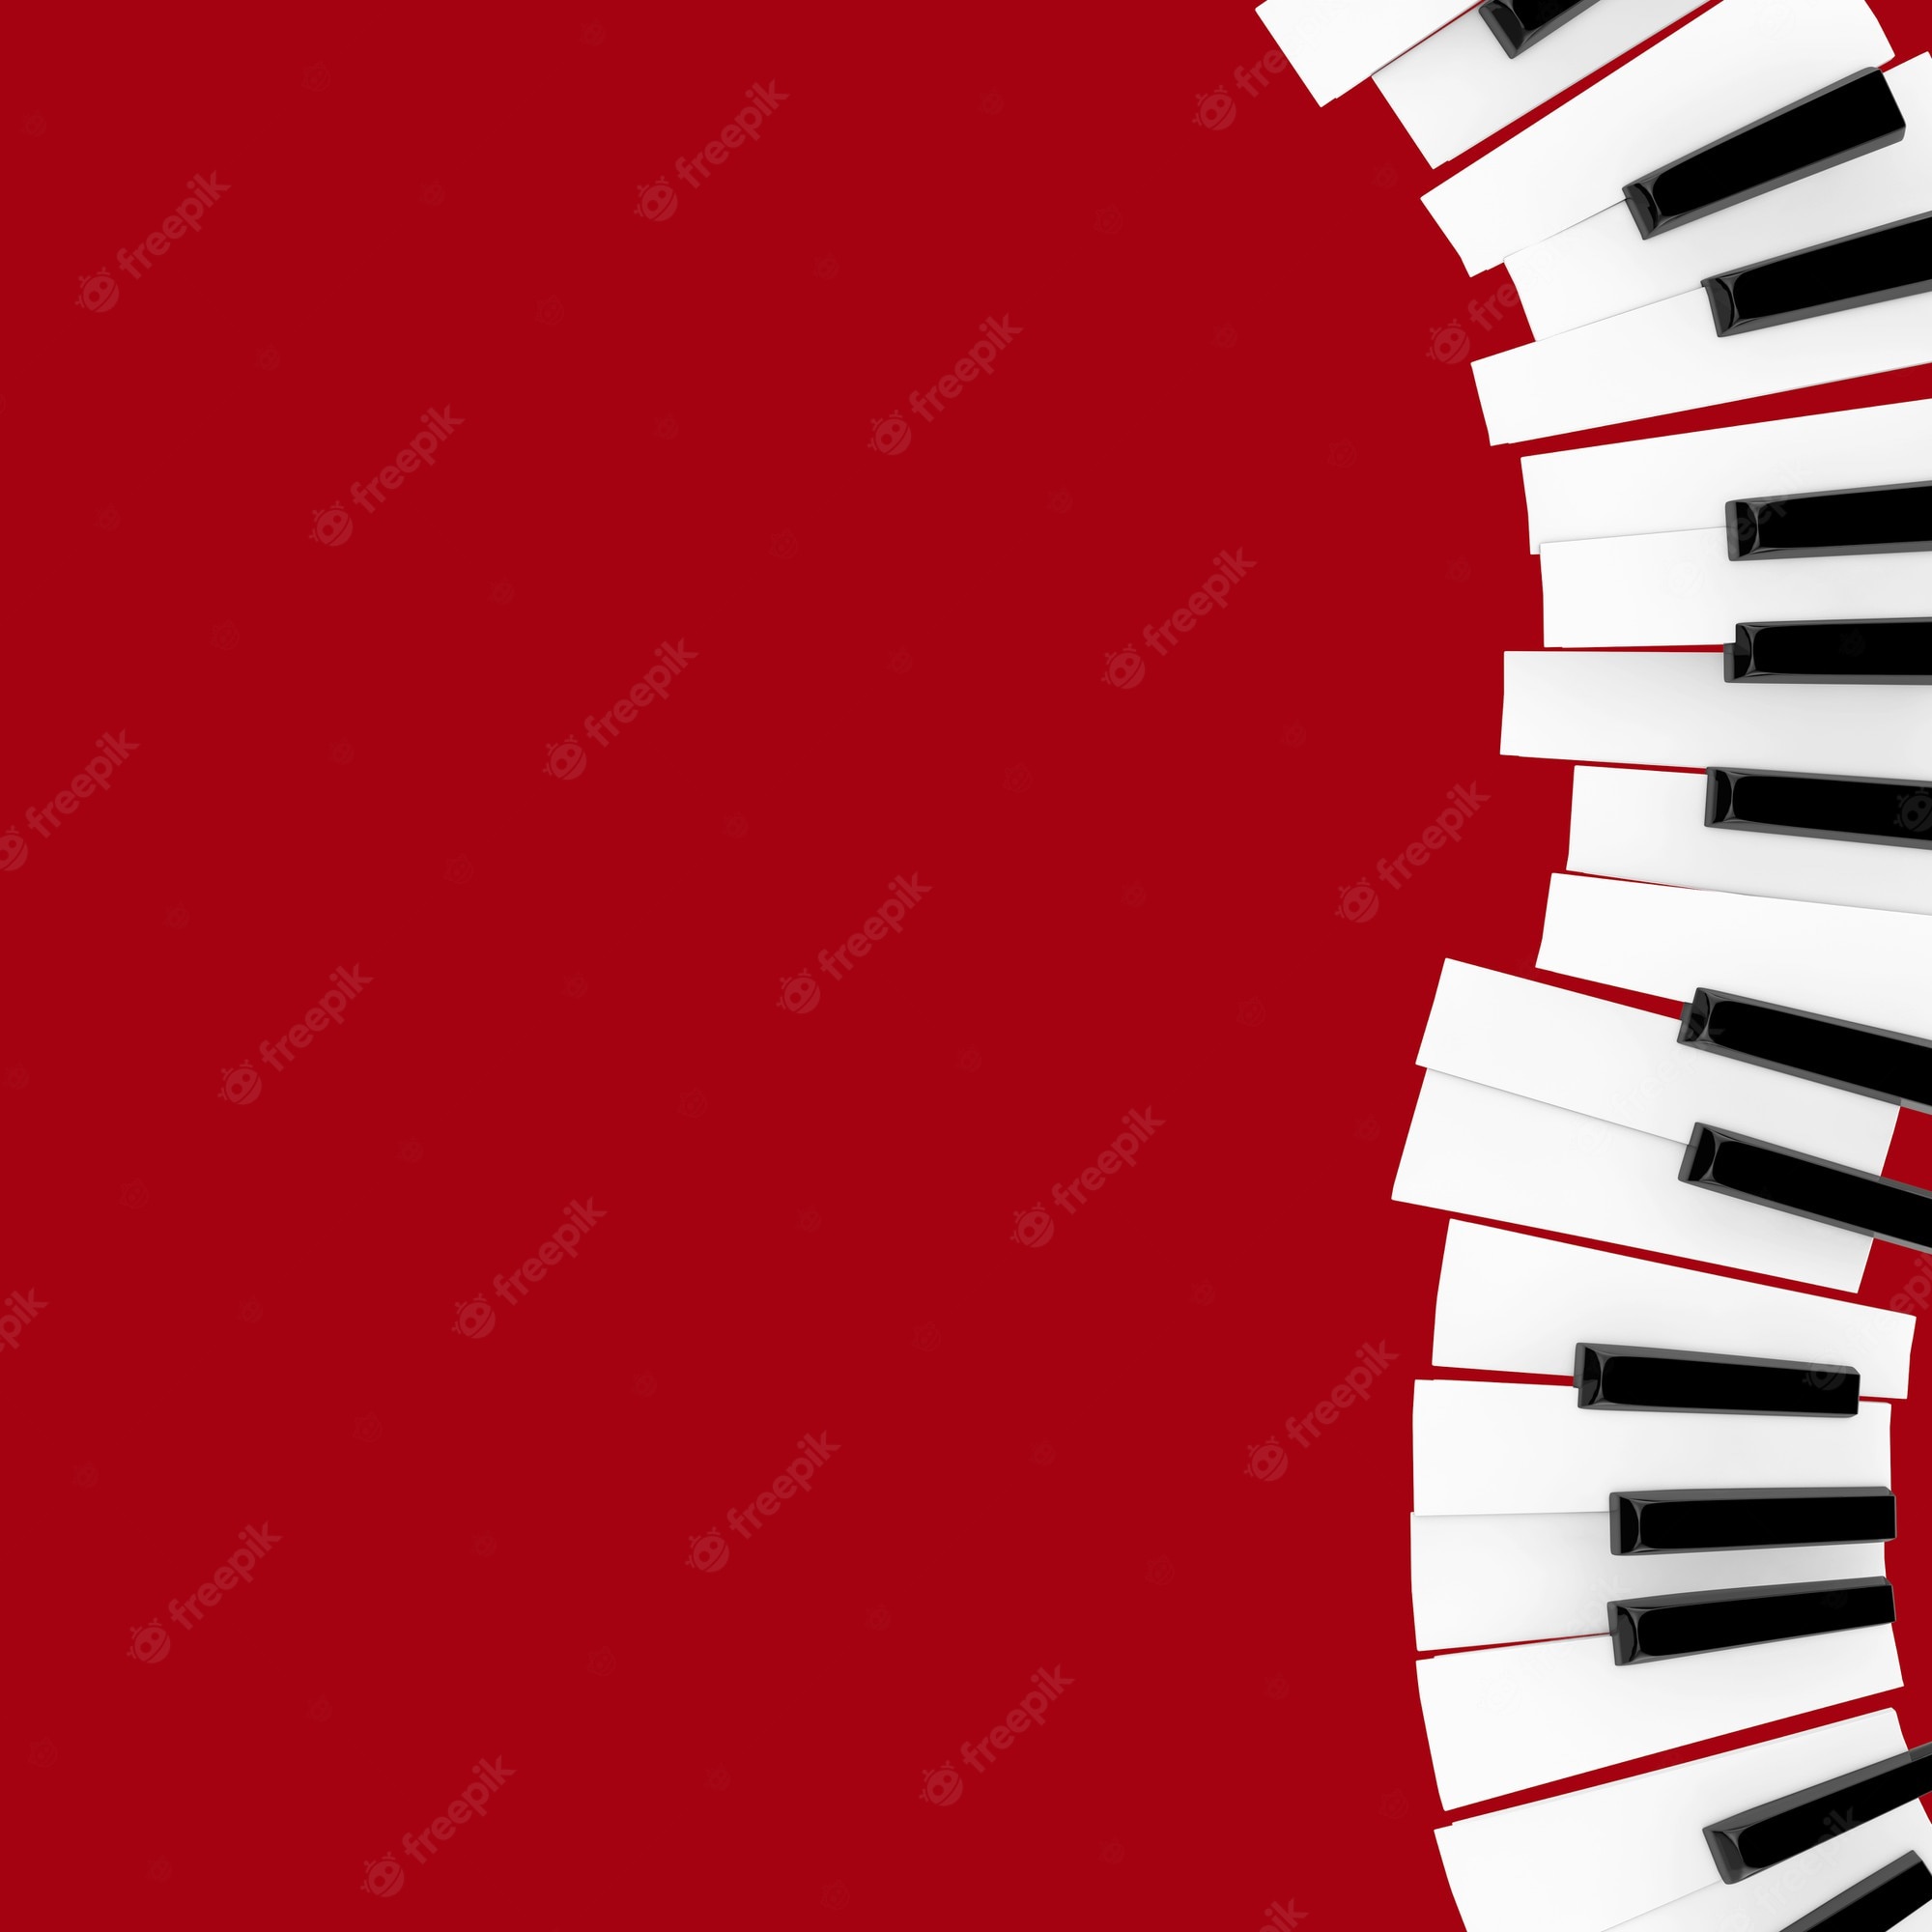 Cool Piano Backgrounds